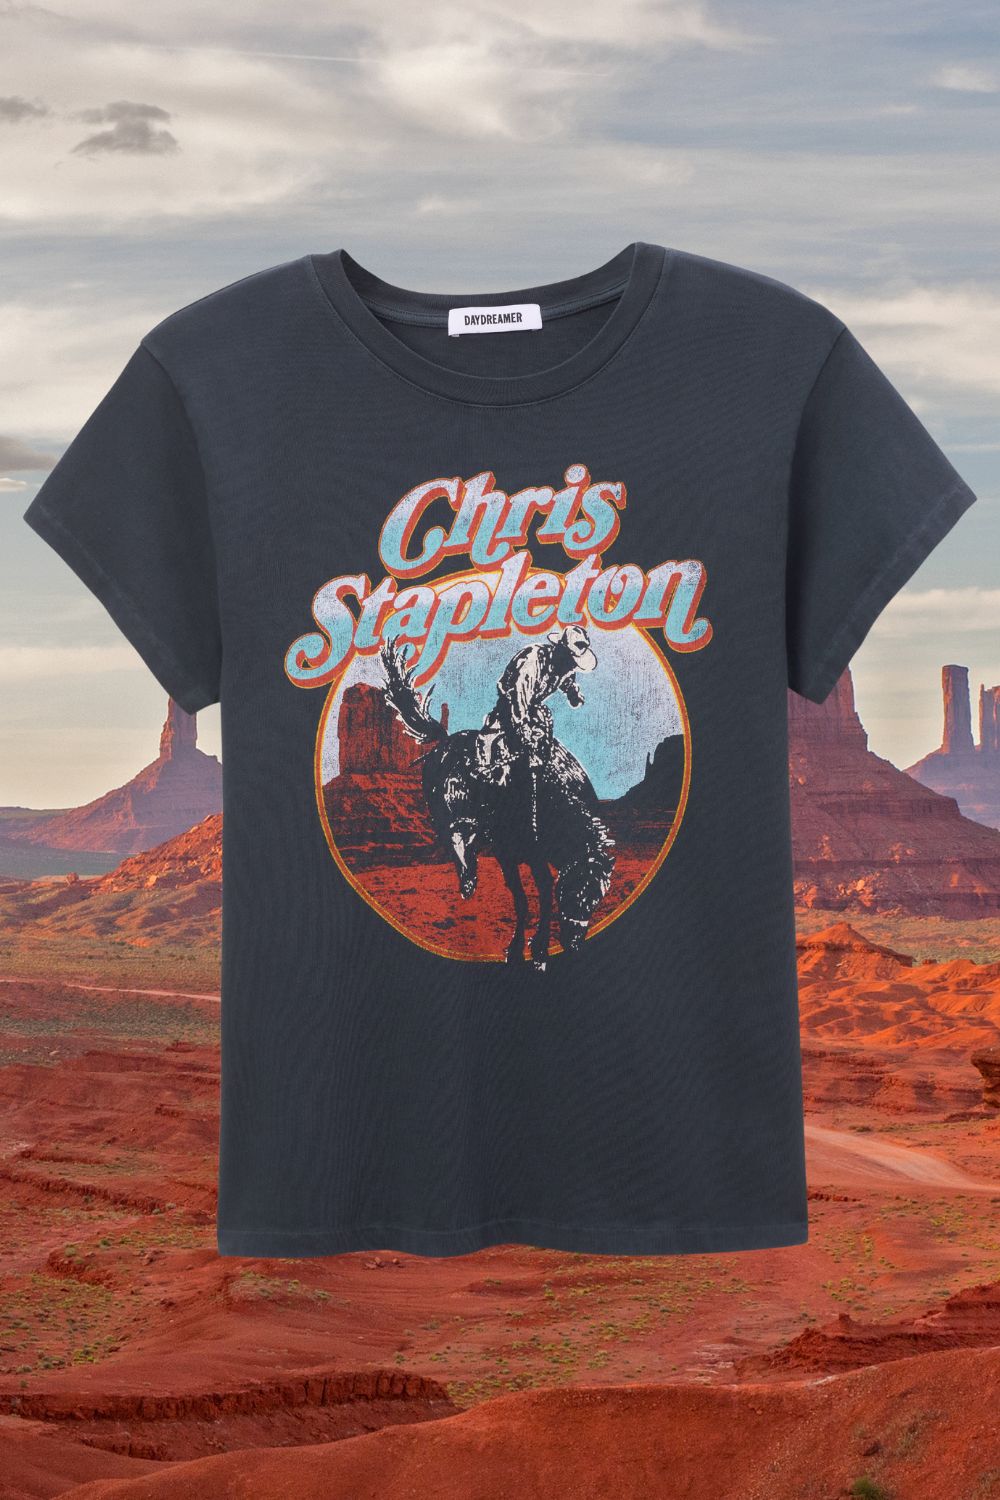 Daydreamer Graphic Tee | Chris Stapleton | Horse Canyons Tour Tee - Women's Shirts & Tops - Blooming Daily